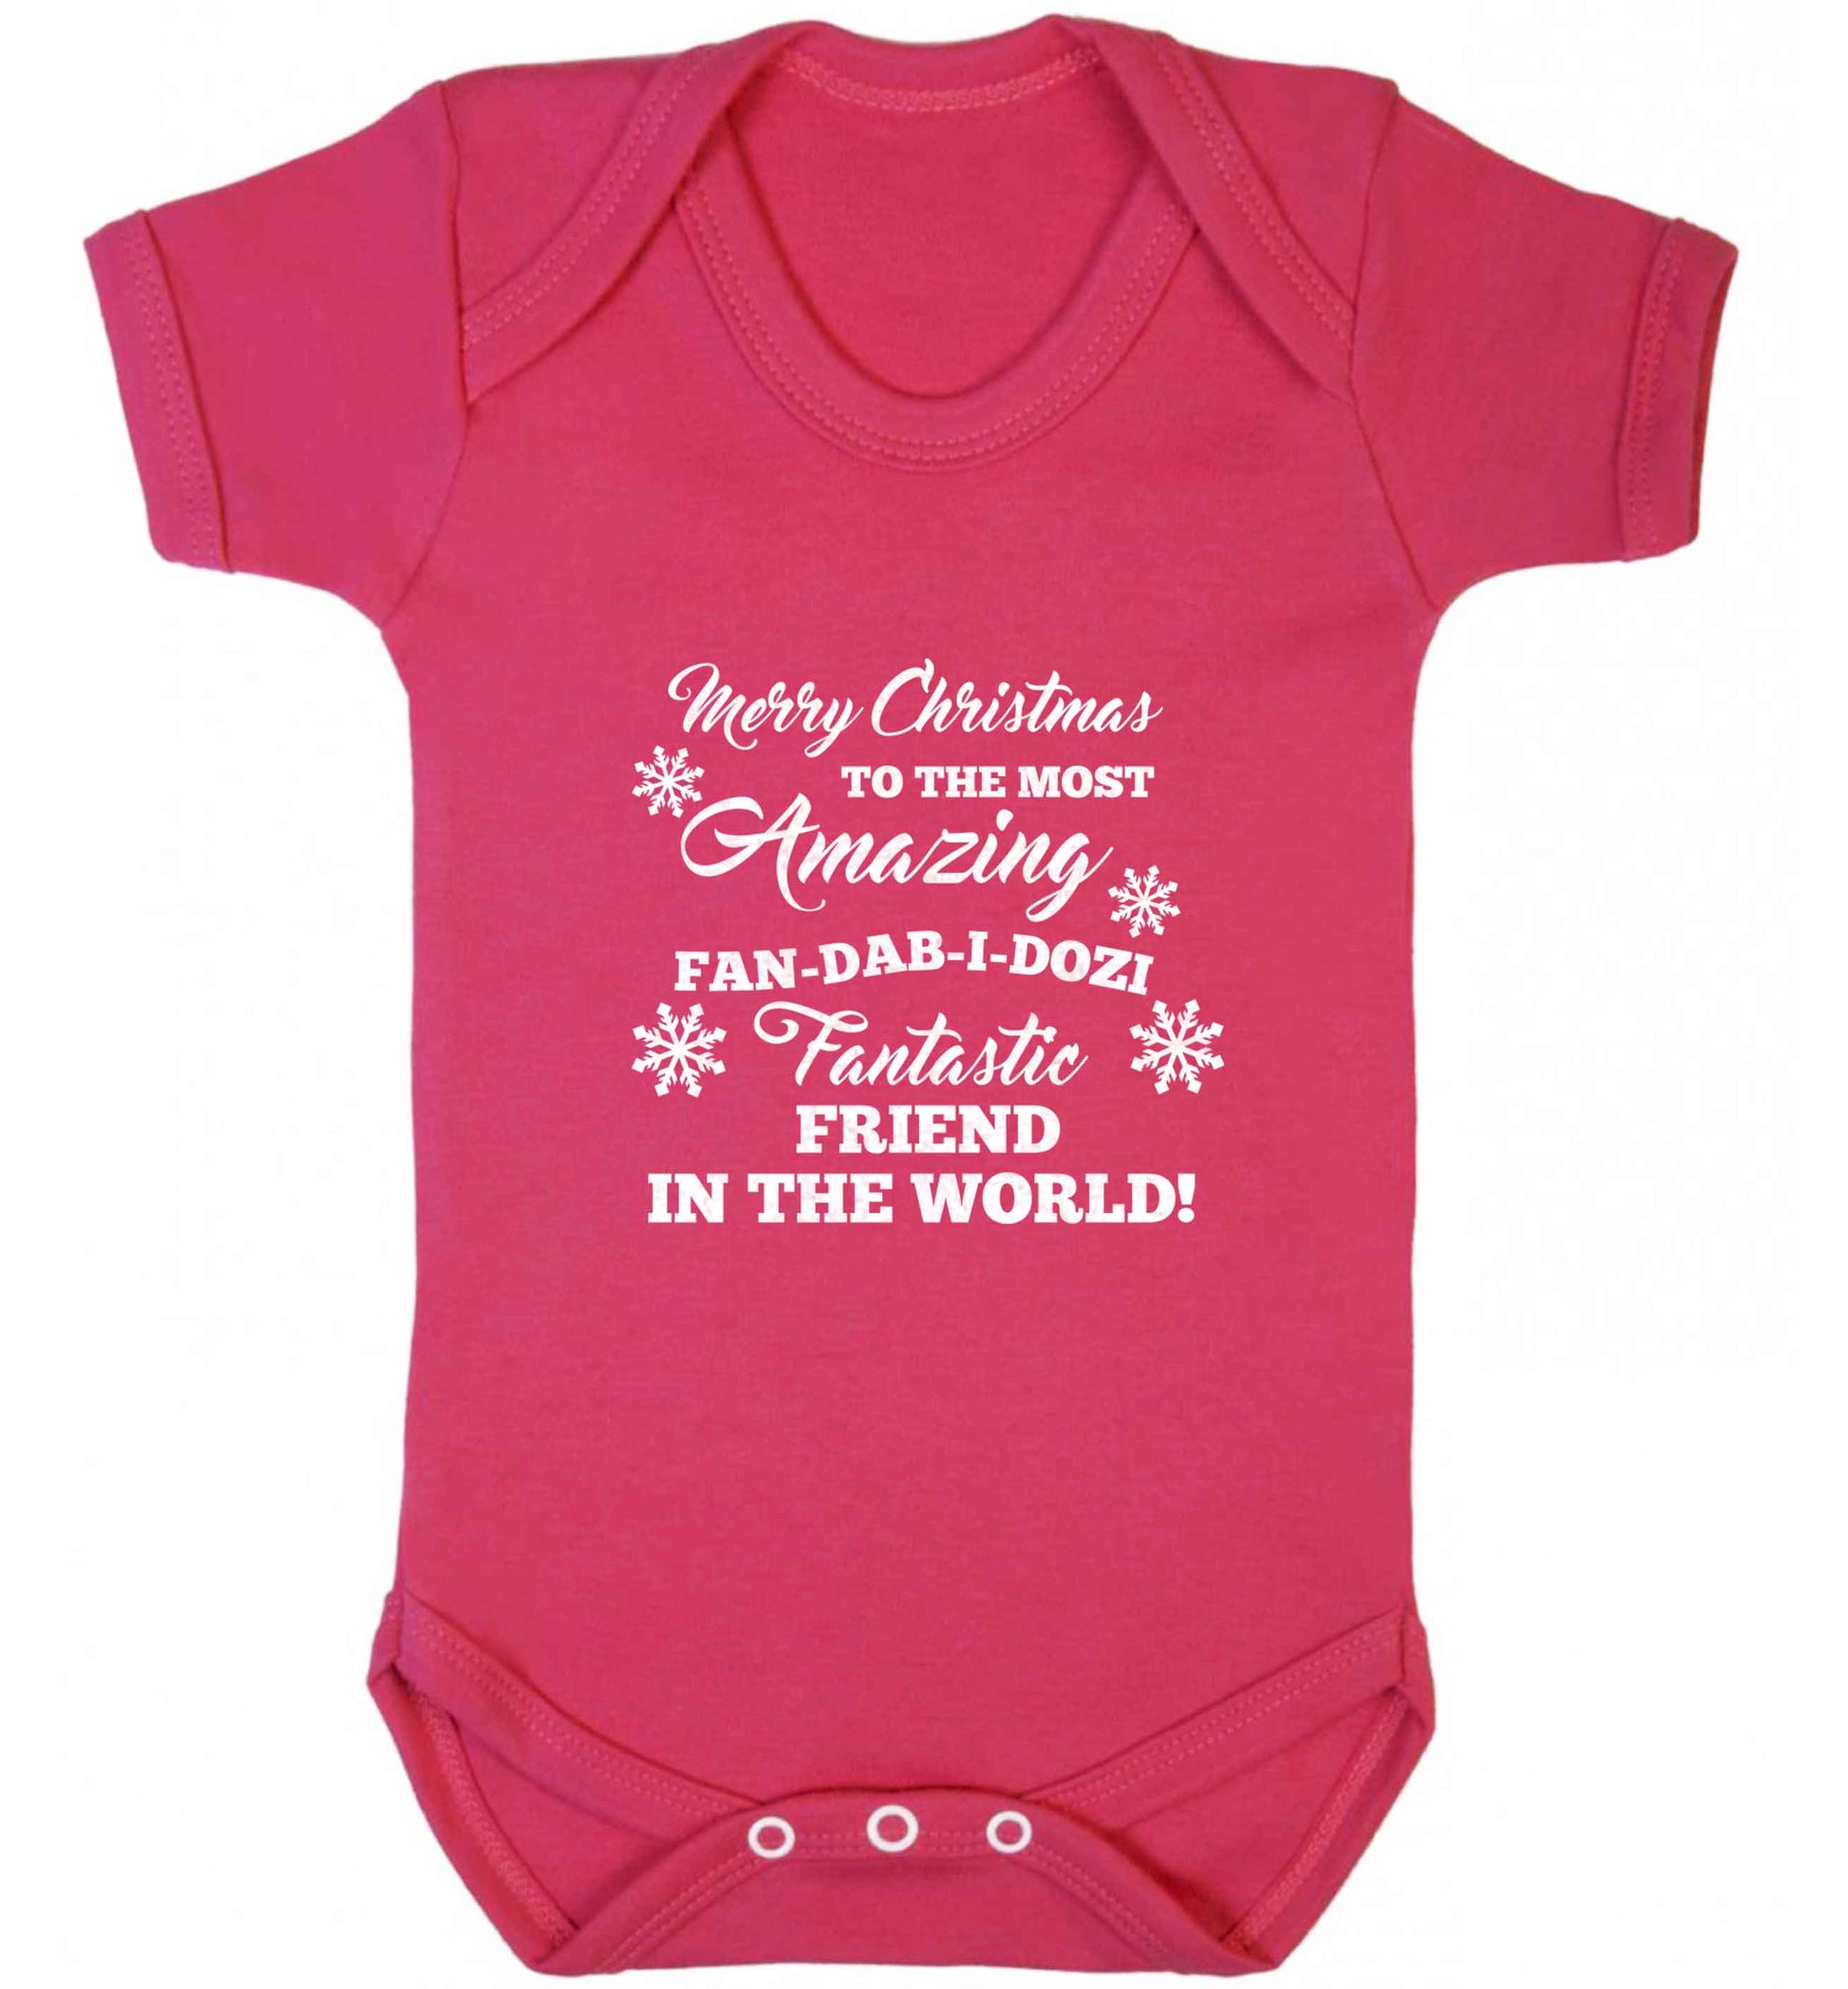 Merry Christmas to the most amazing fan-dab-i-dozi fantasic friend in the world baby vest dark pink 18-24 months